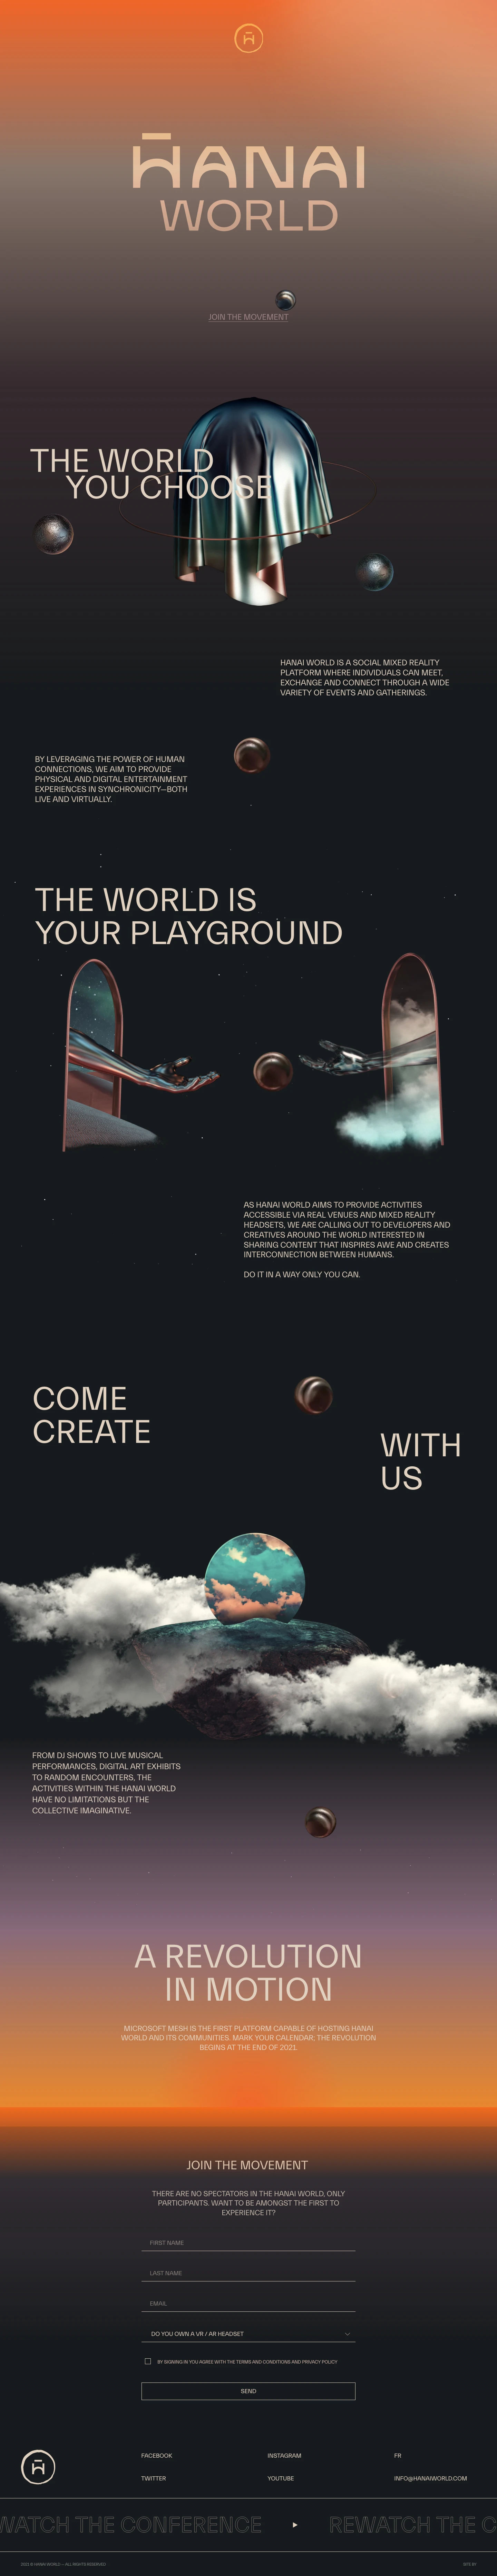 Hanai World Landing Page Example: Hanai World is a social mixed reality platform where individuals can meet, exchange and connect through a wide variety of events and gatherings.